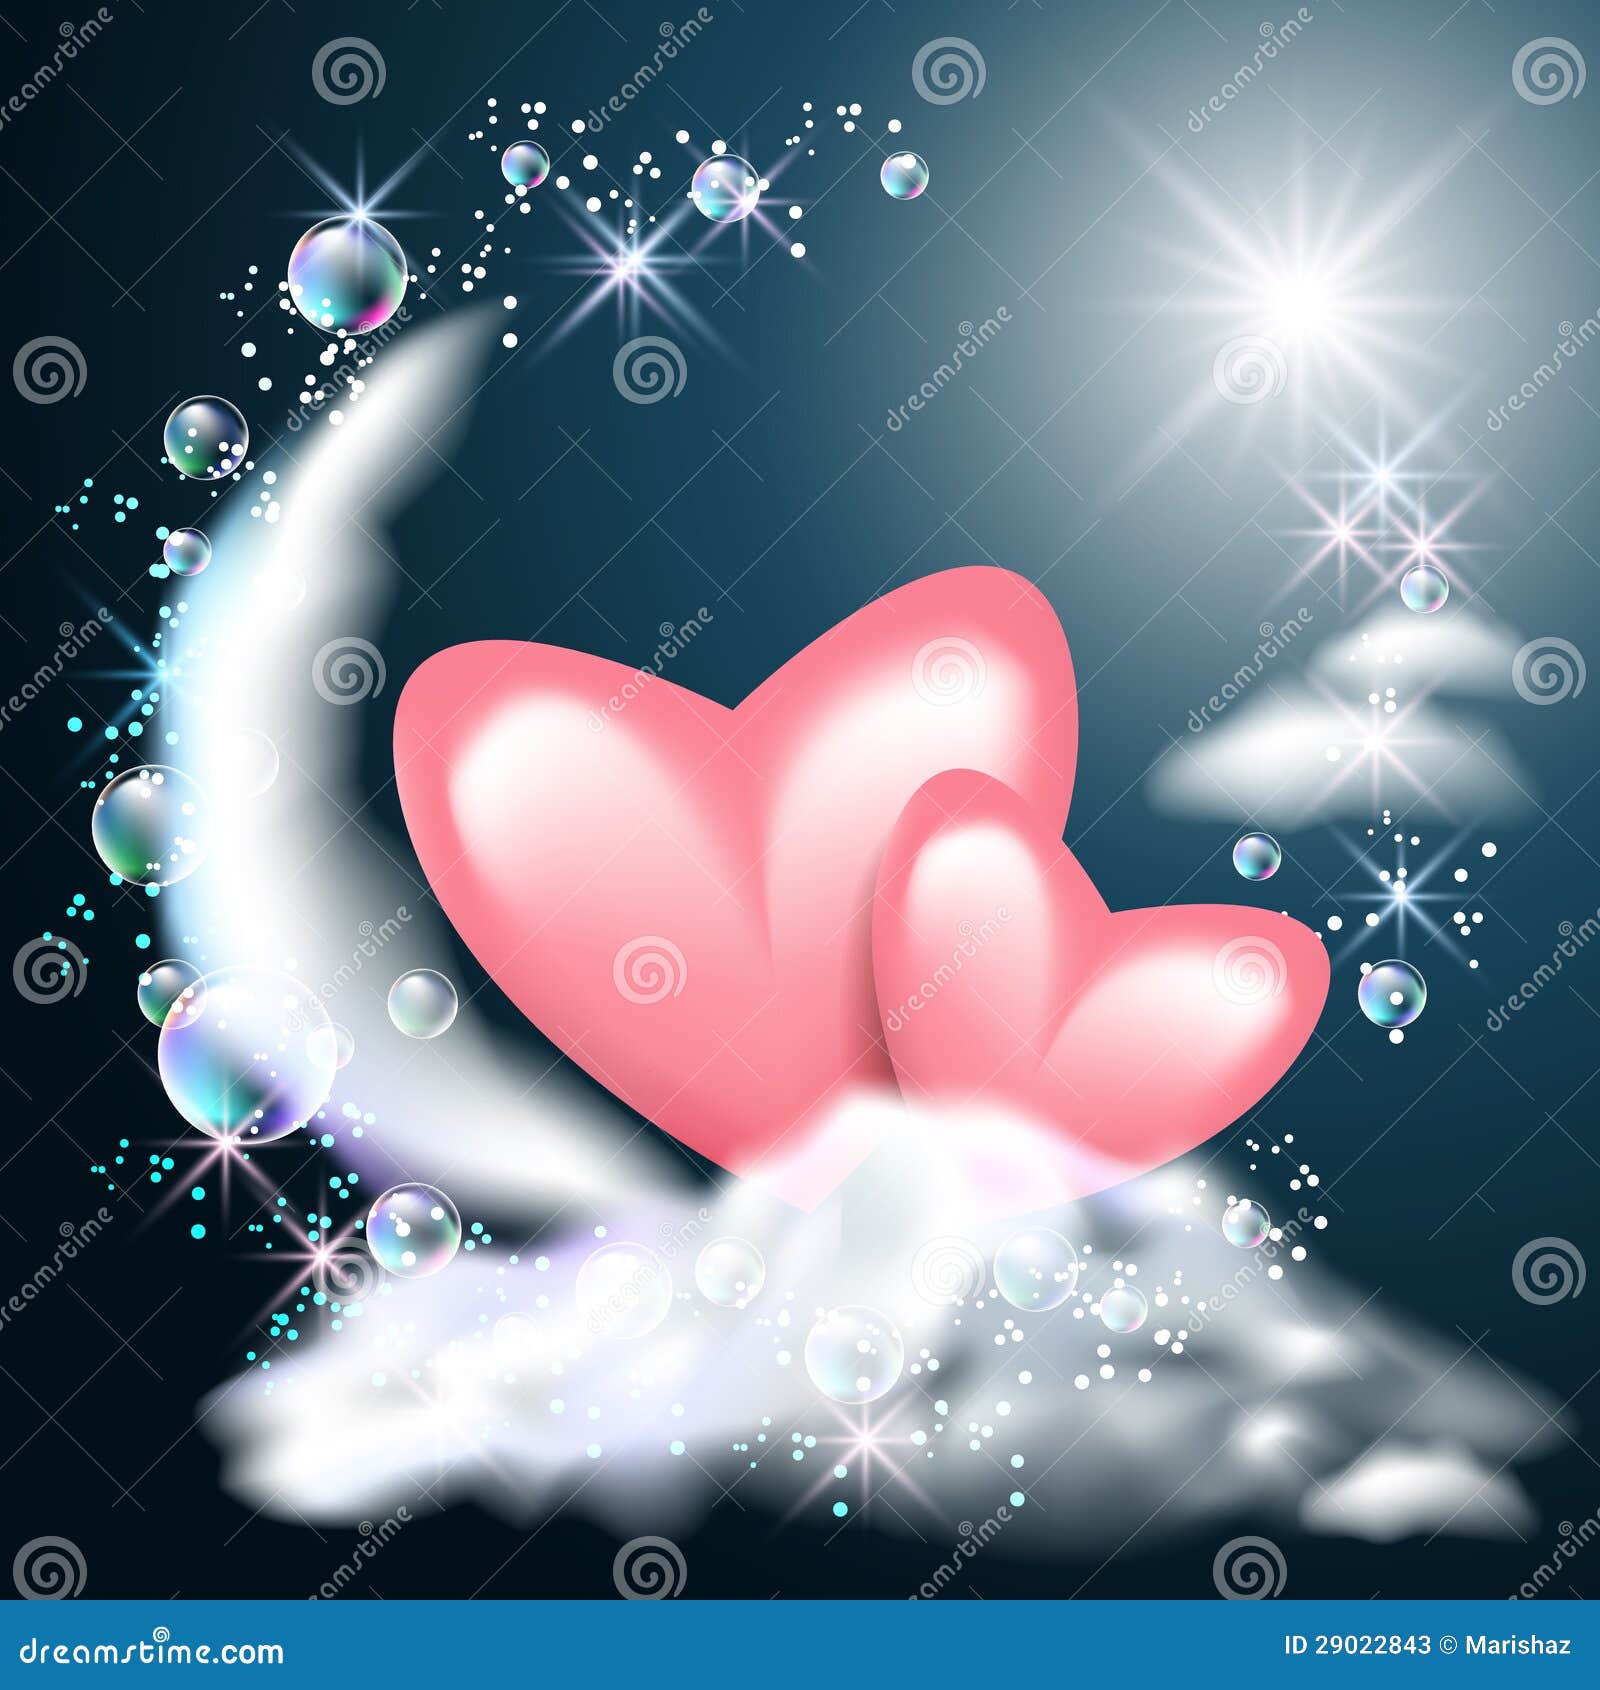 Moon And Two Hearts On The Clouds Stock Photos - Image: 29022843